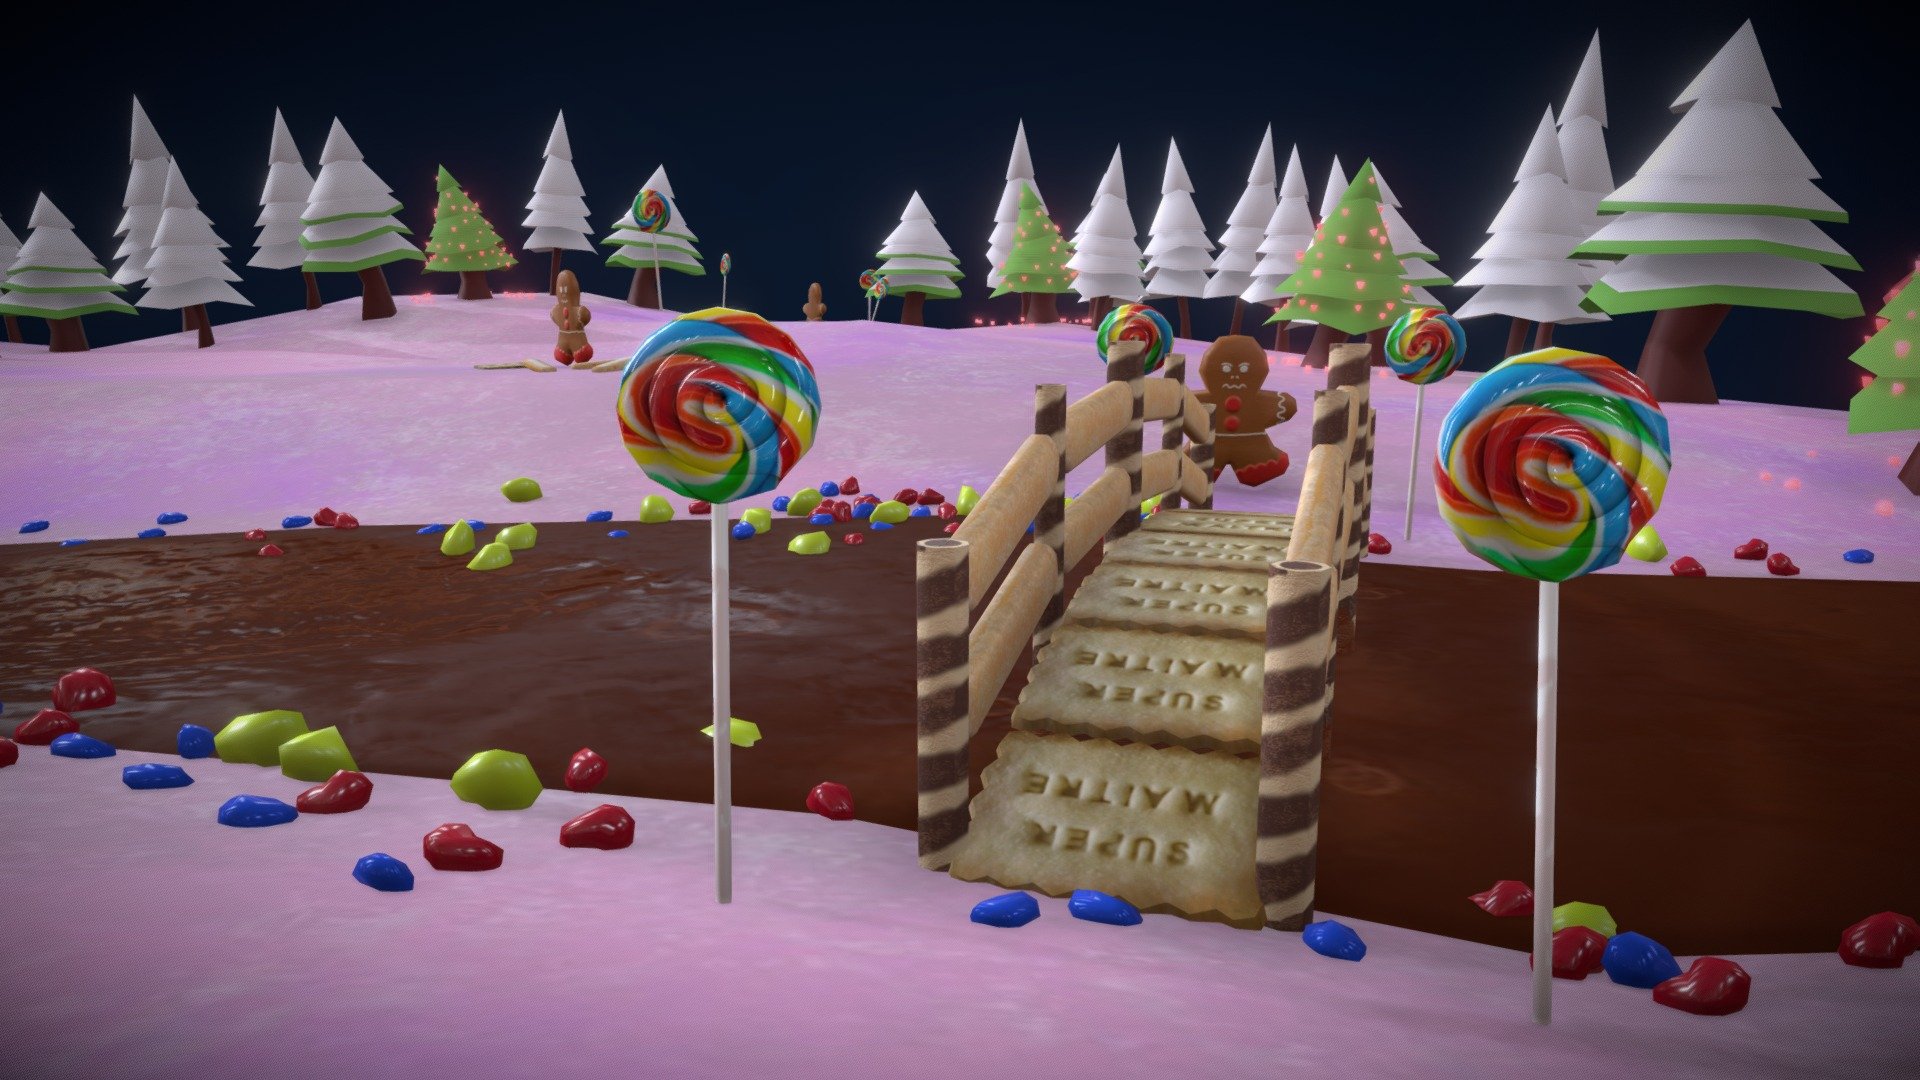 For this project, I had a tight time schedule ((around  4 days))
It's a small part of river in the candy world&hellip; my wife imagined it and I made this map especially for the sketchfab January 2020 challenge, hope you like it 3d model